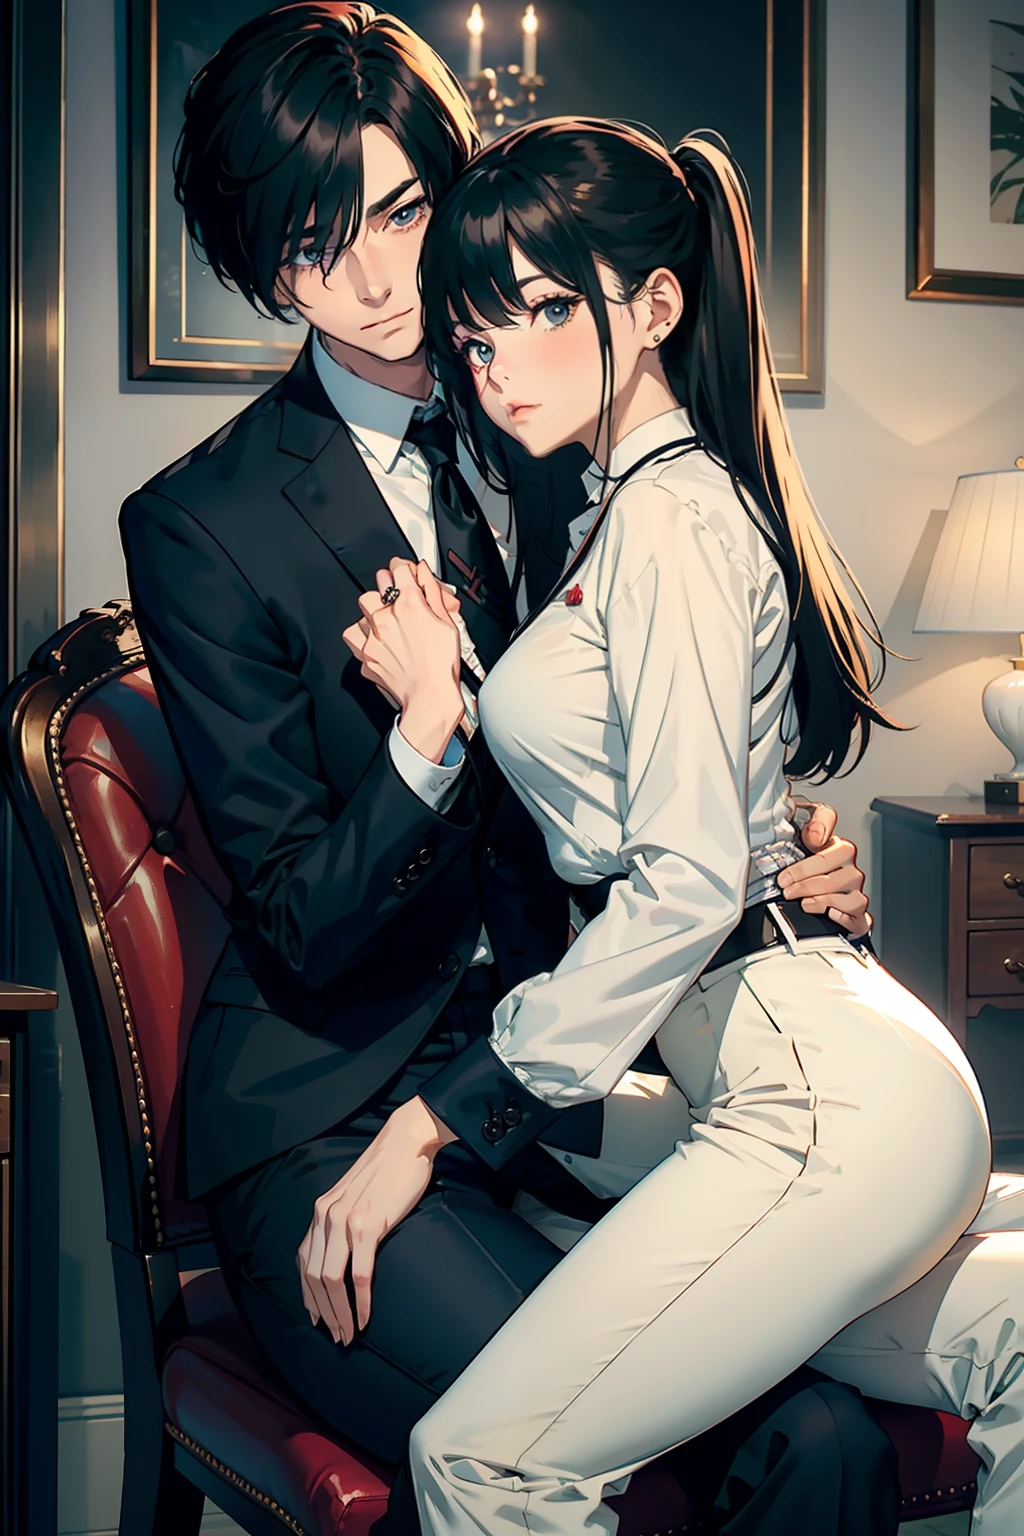 top-quality　​masterpiece　Male and female couples　Girl sitting on a chair wearing a tight skirt over a blouse。Man hugging each other from behind。Man wearing suits long pants uniforms with mash cut hairstyles。Without glasses、Revenge relationship